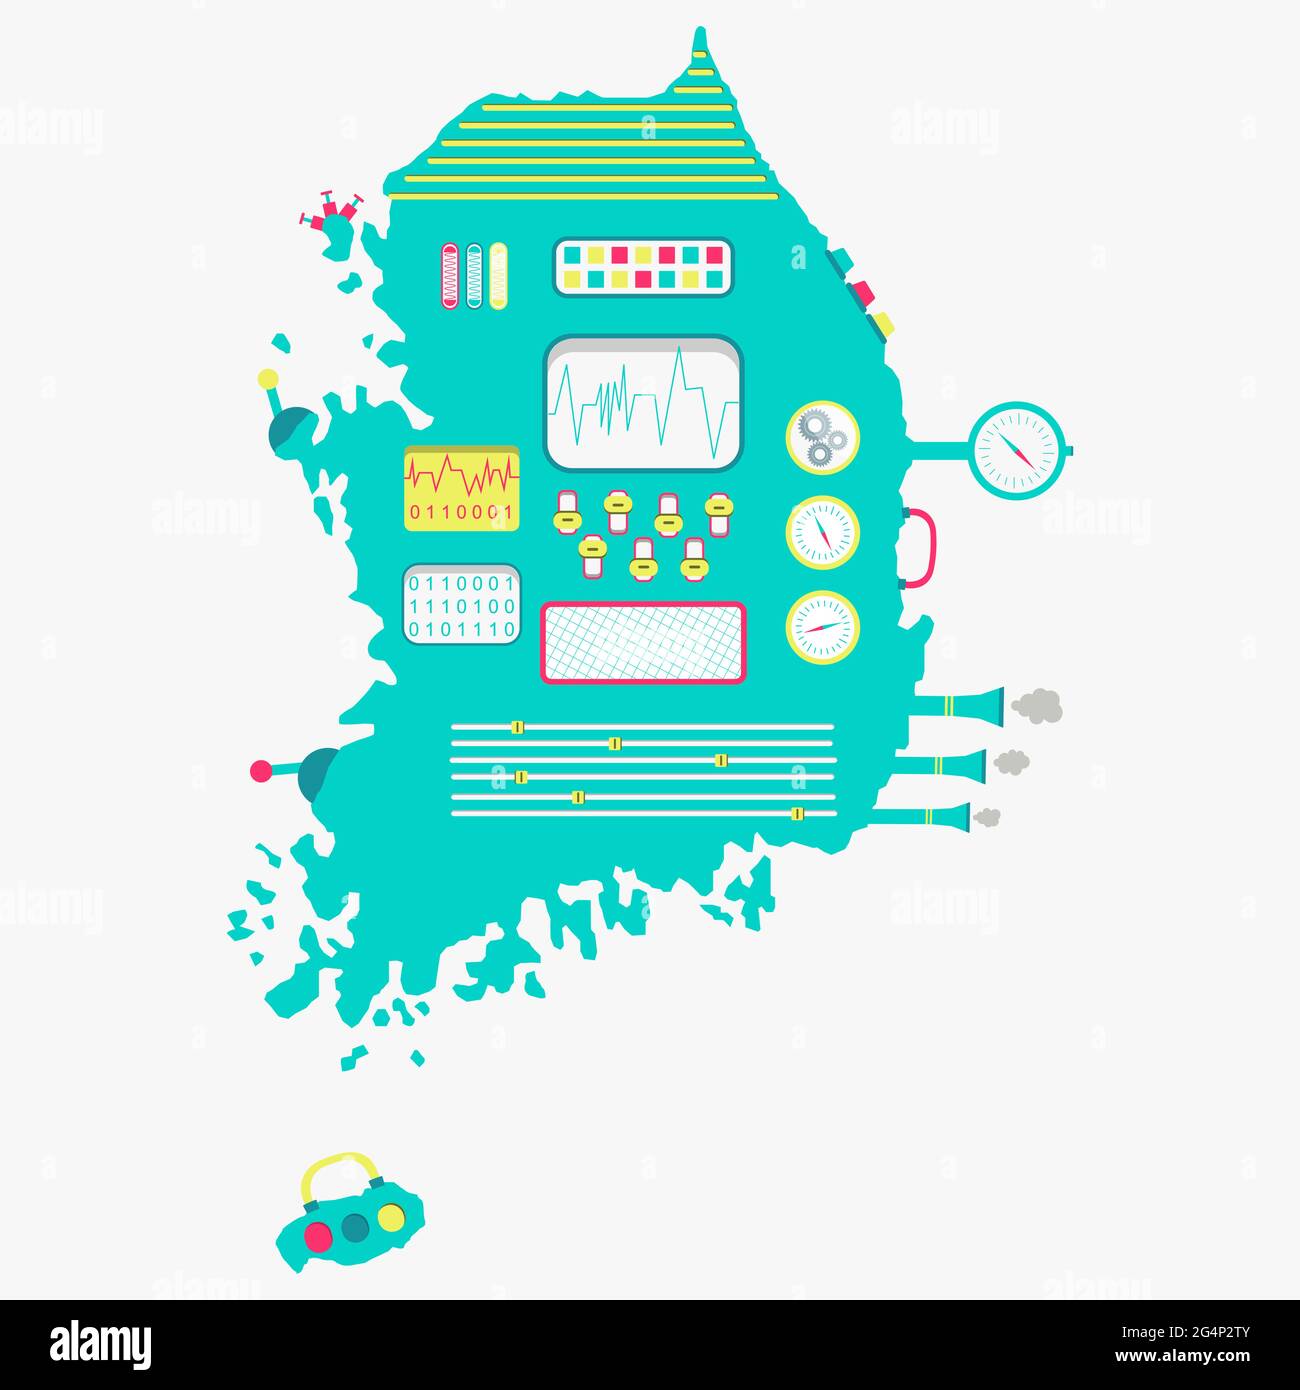 Map of South Korea like a cute machine with buttons, panels and levers. Isolated. White background. Stock Vector